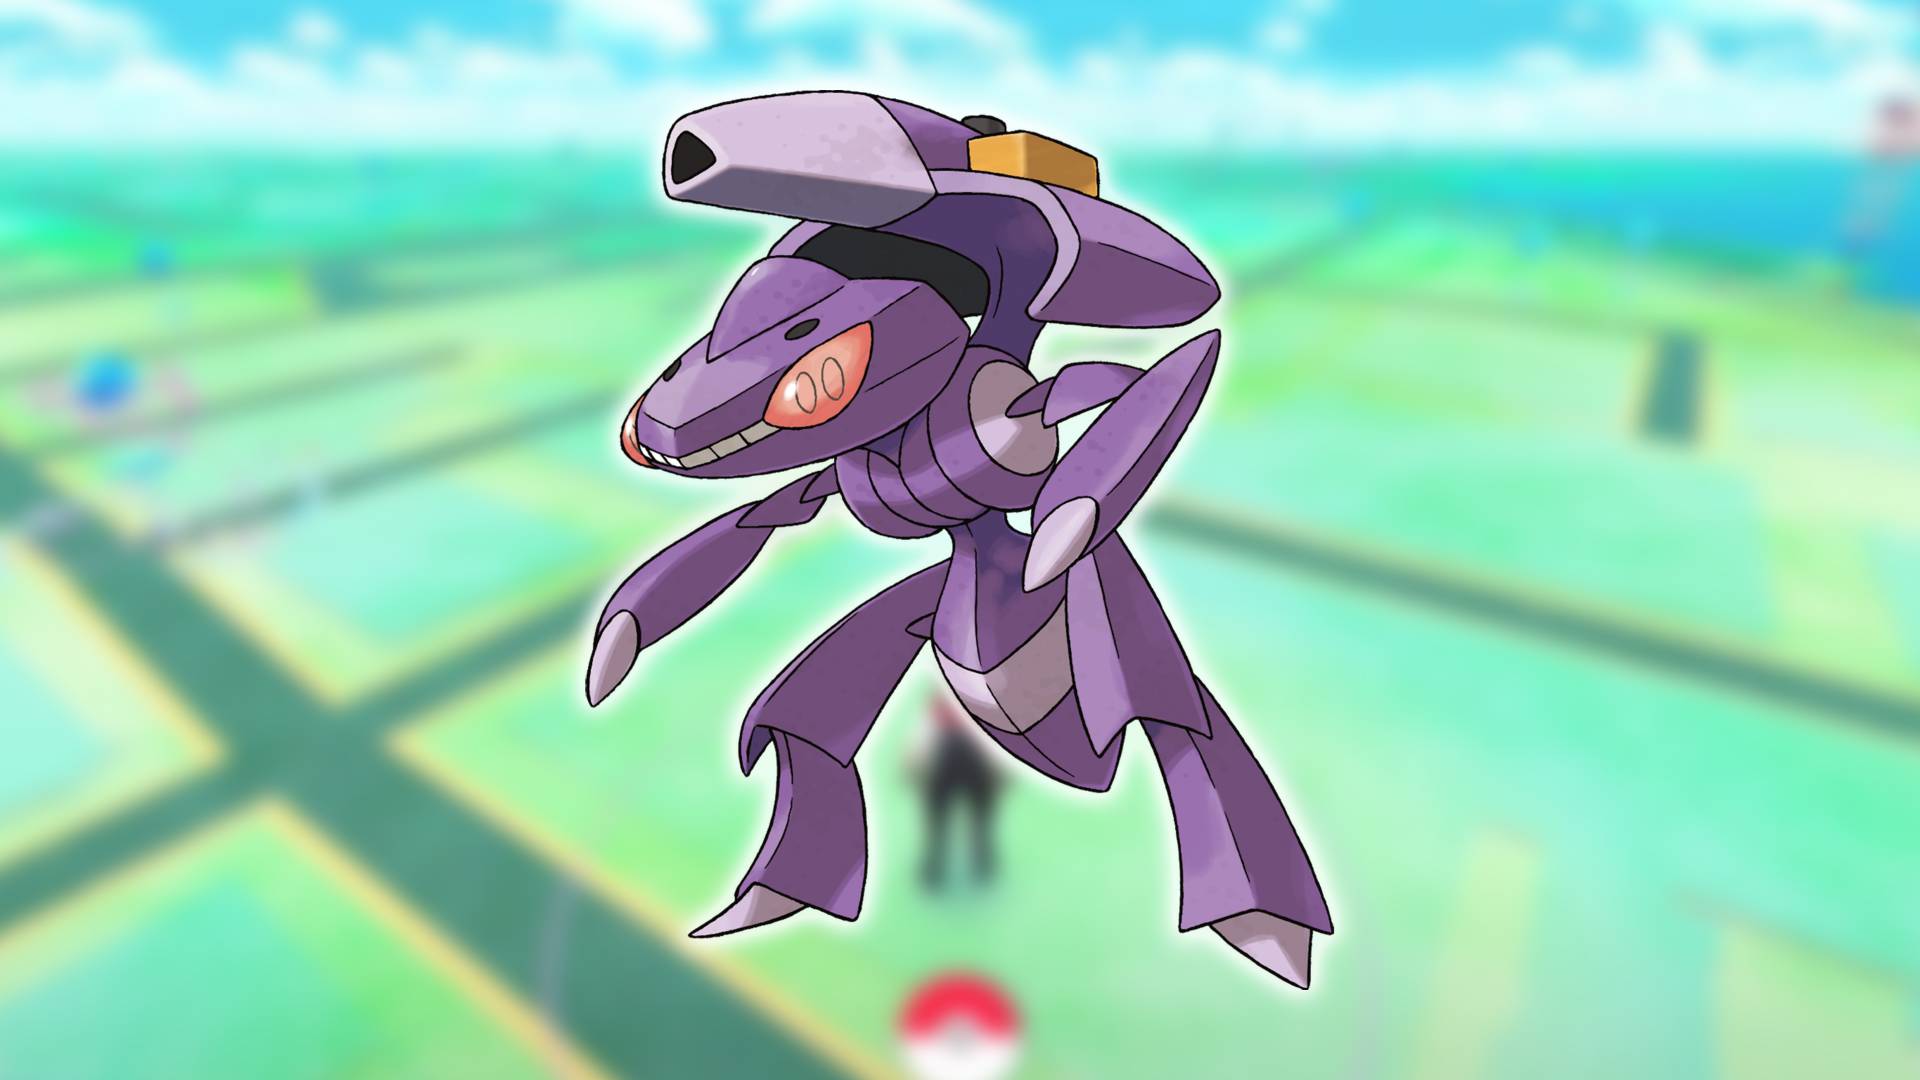 Pokemon GO: Can You Catch Shiny Genesect?